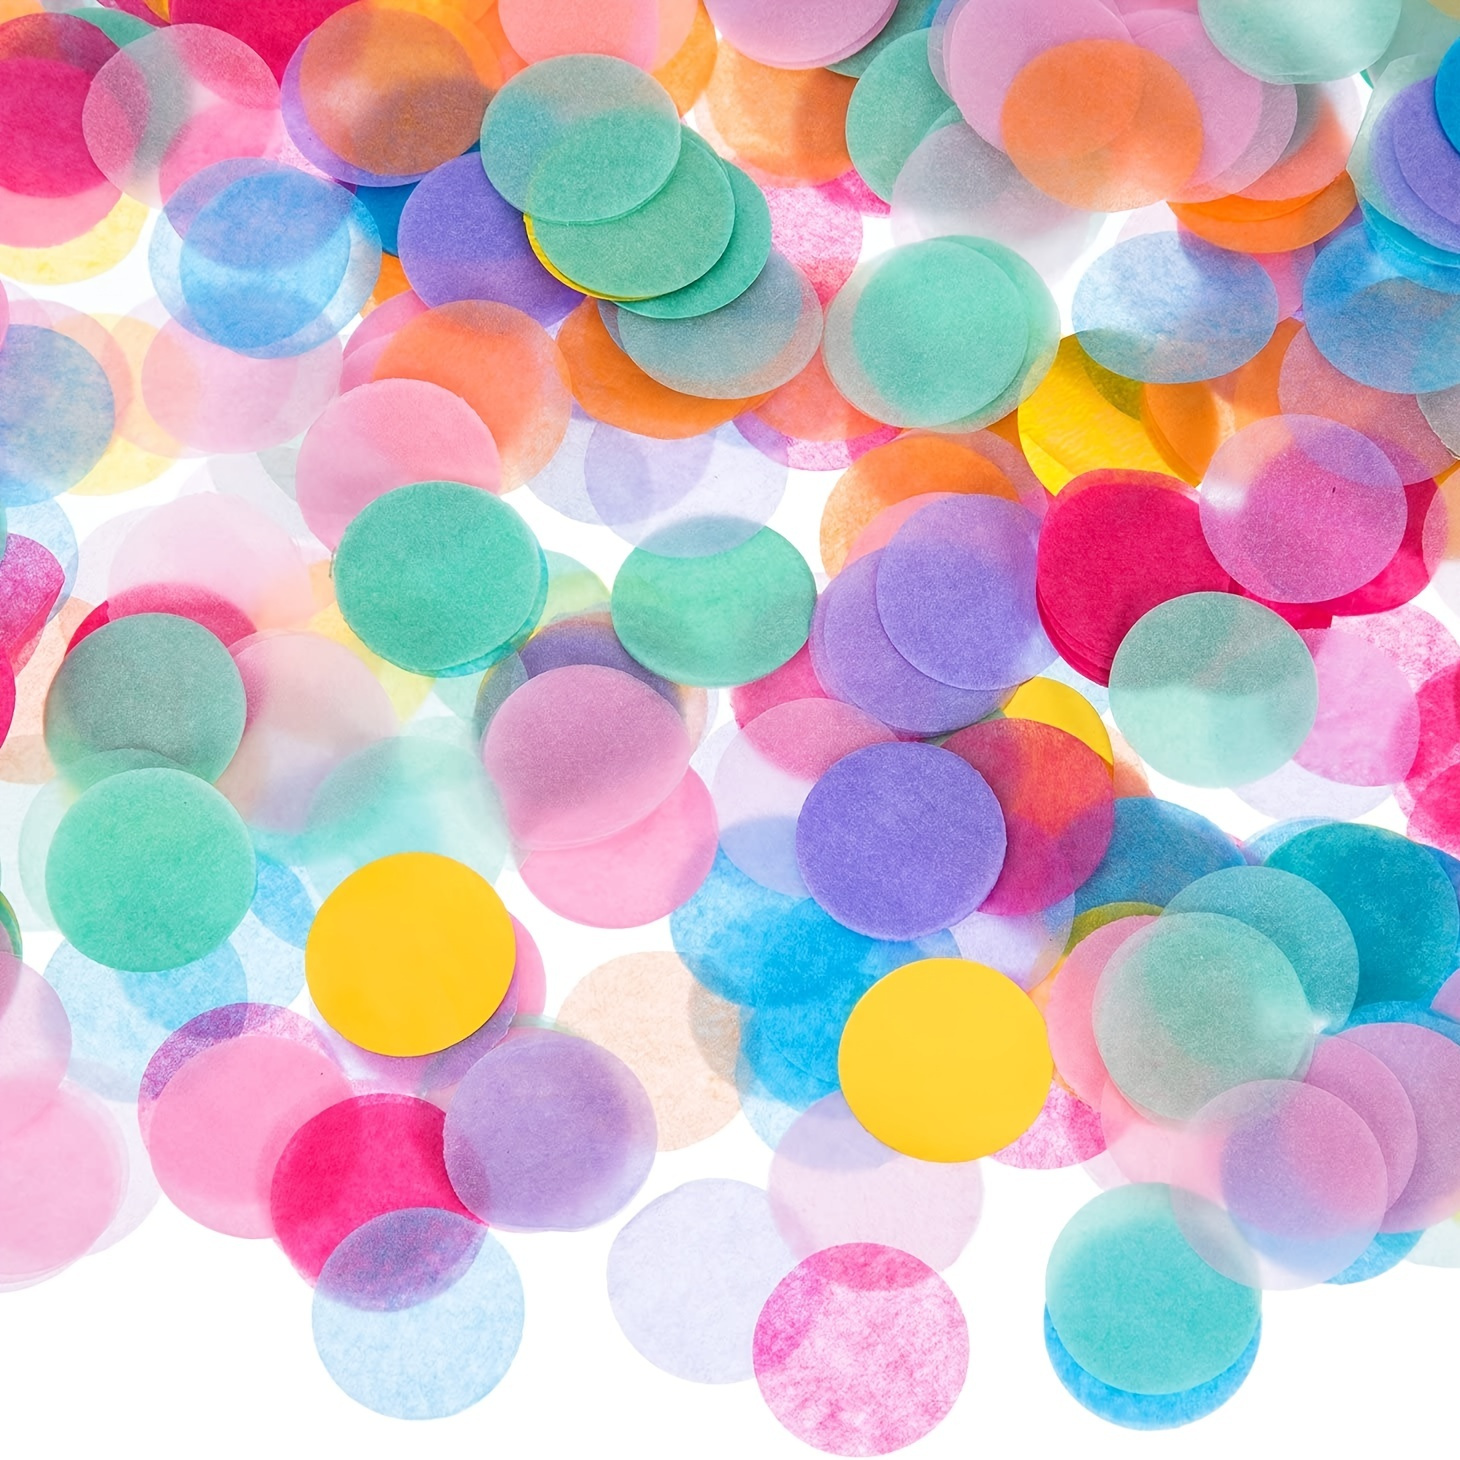 

10000pcs 1 Inch Multicolor Round Tissue Confetti Paper For Wedding Tossing & Creating Party Atmosphere Easter Gift